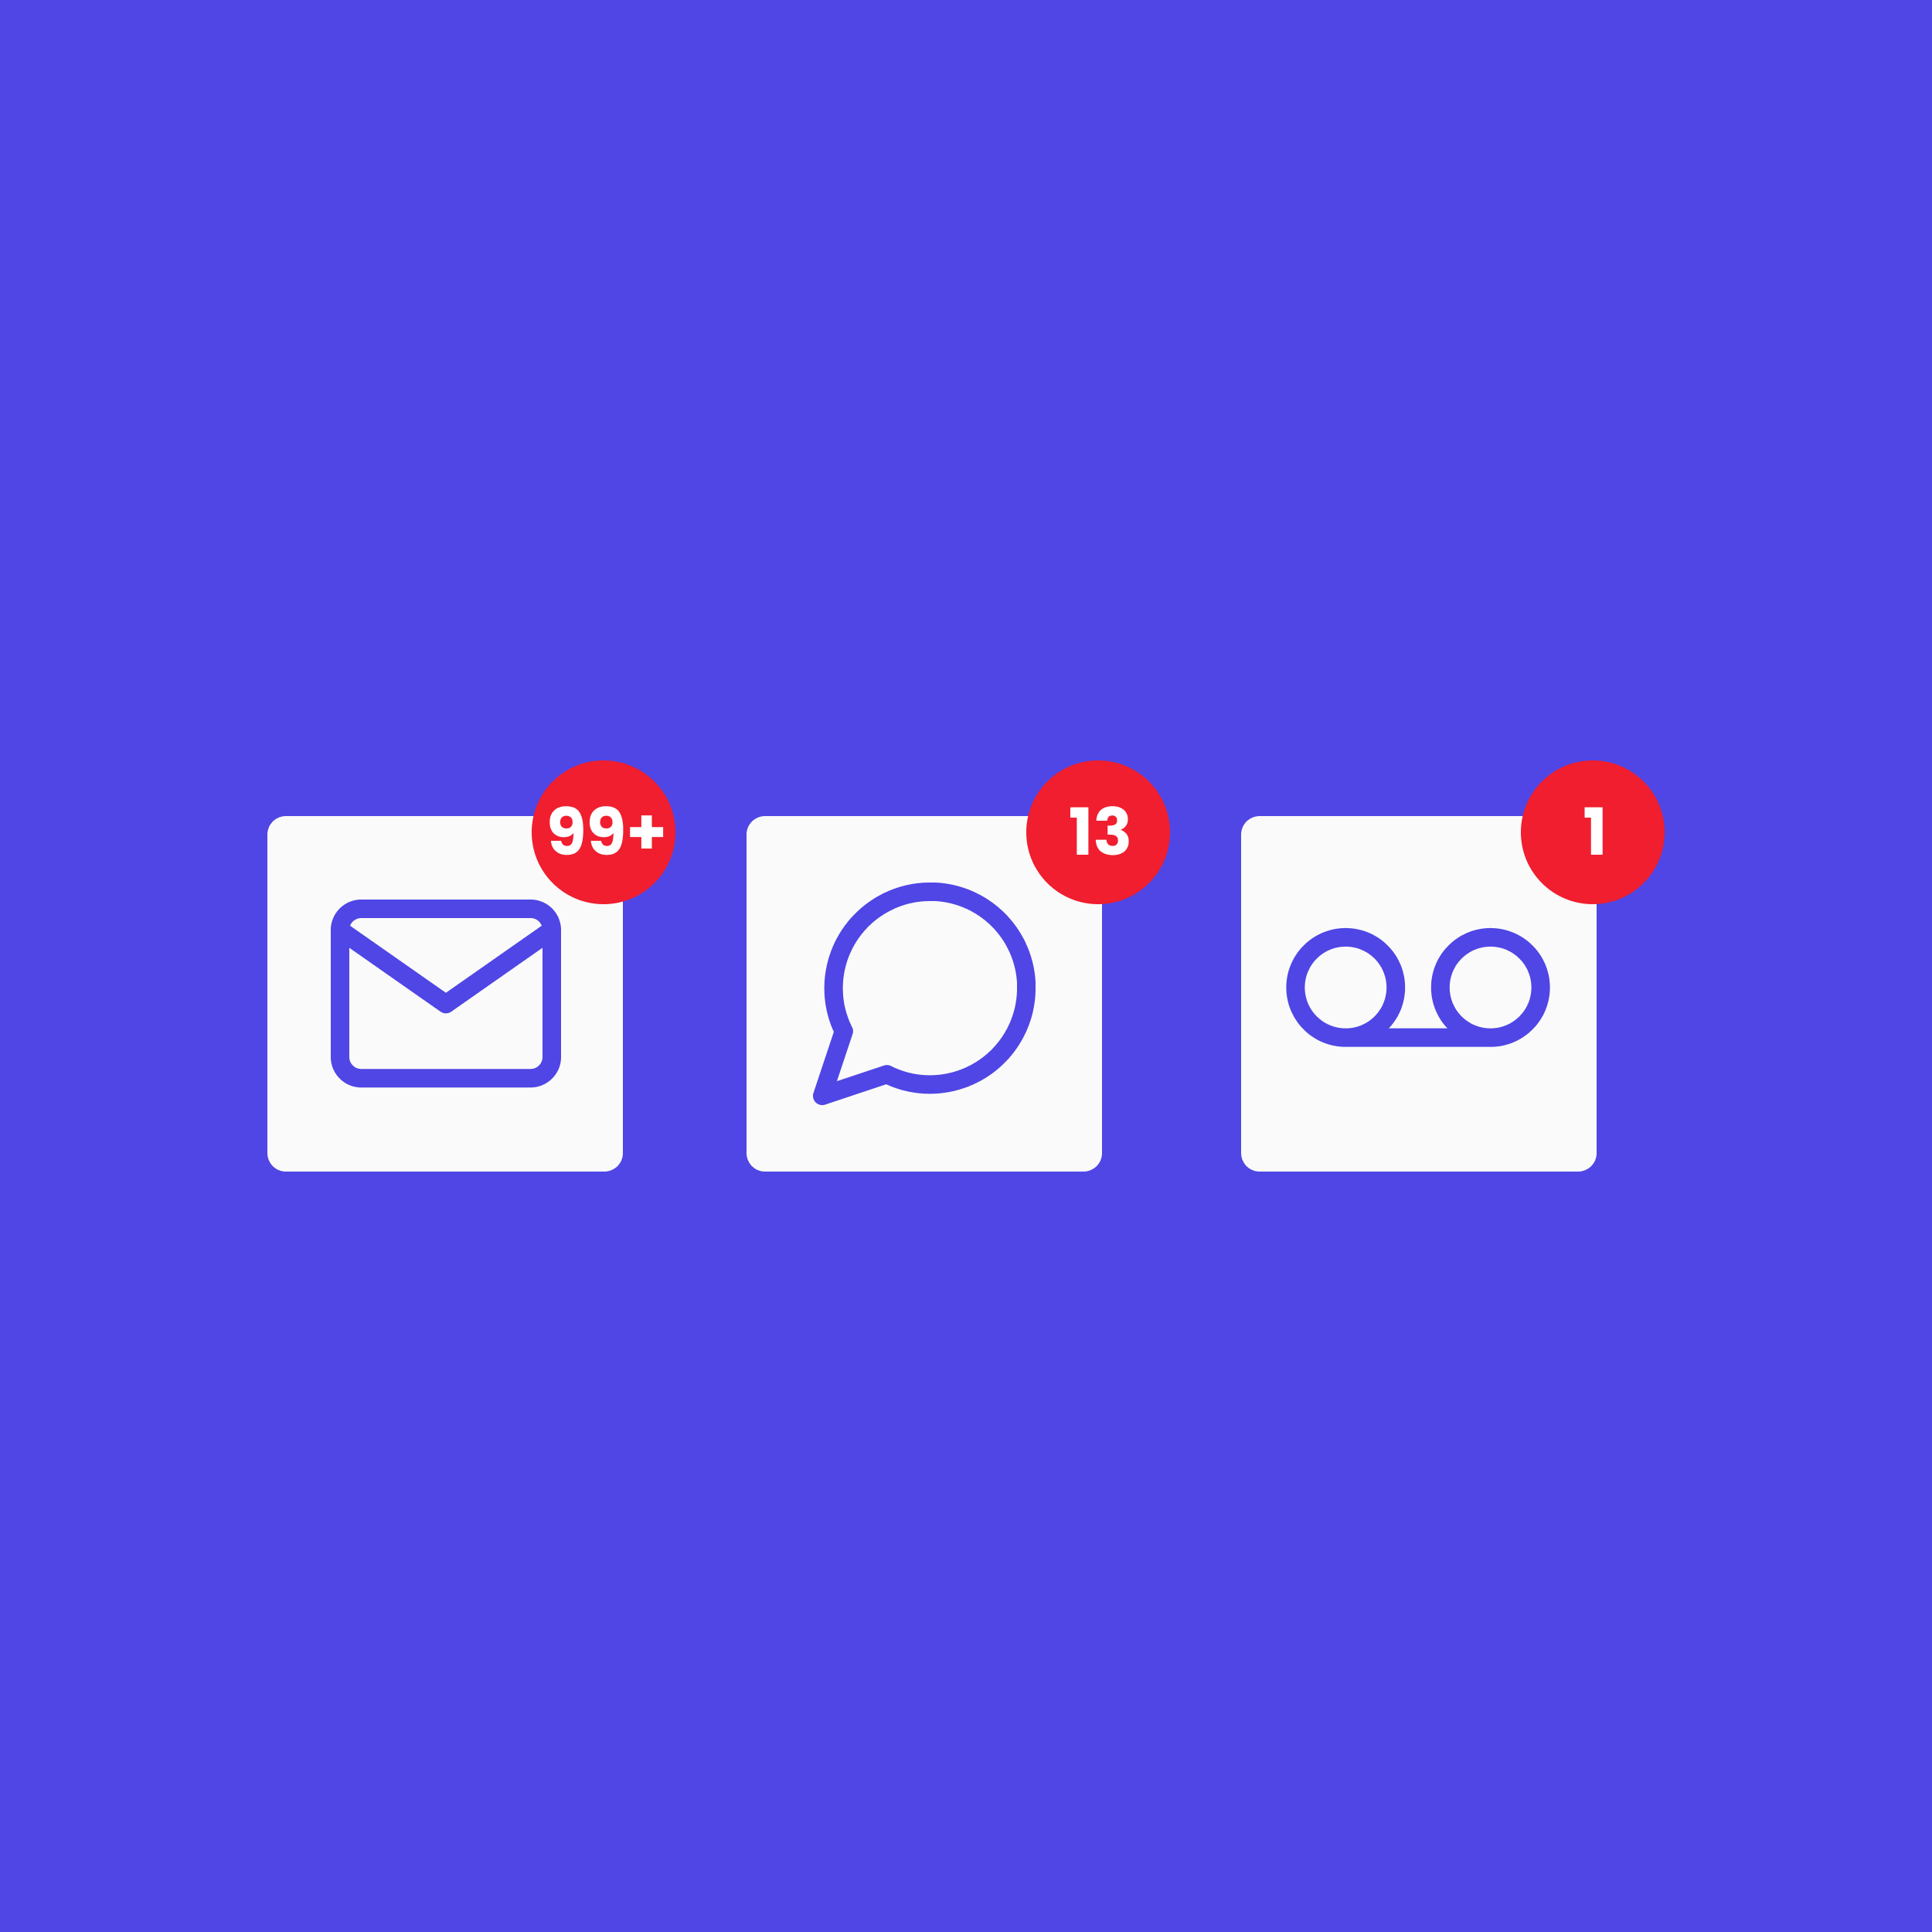 Icons comparing inboxes of email, sms and voicemail.